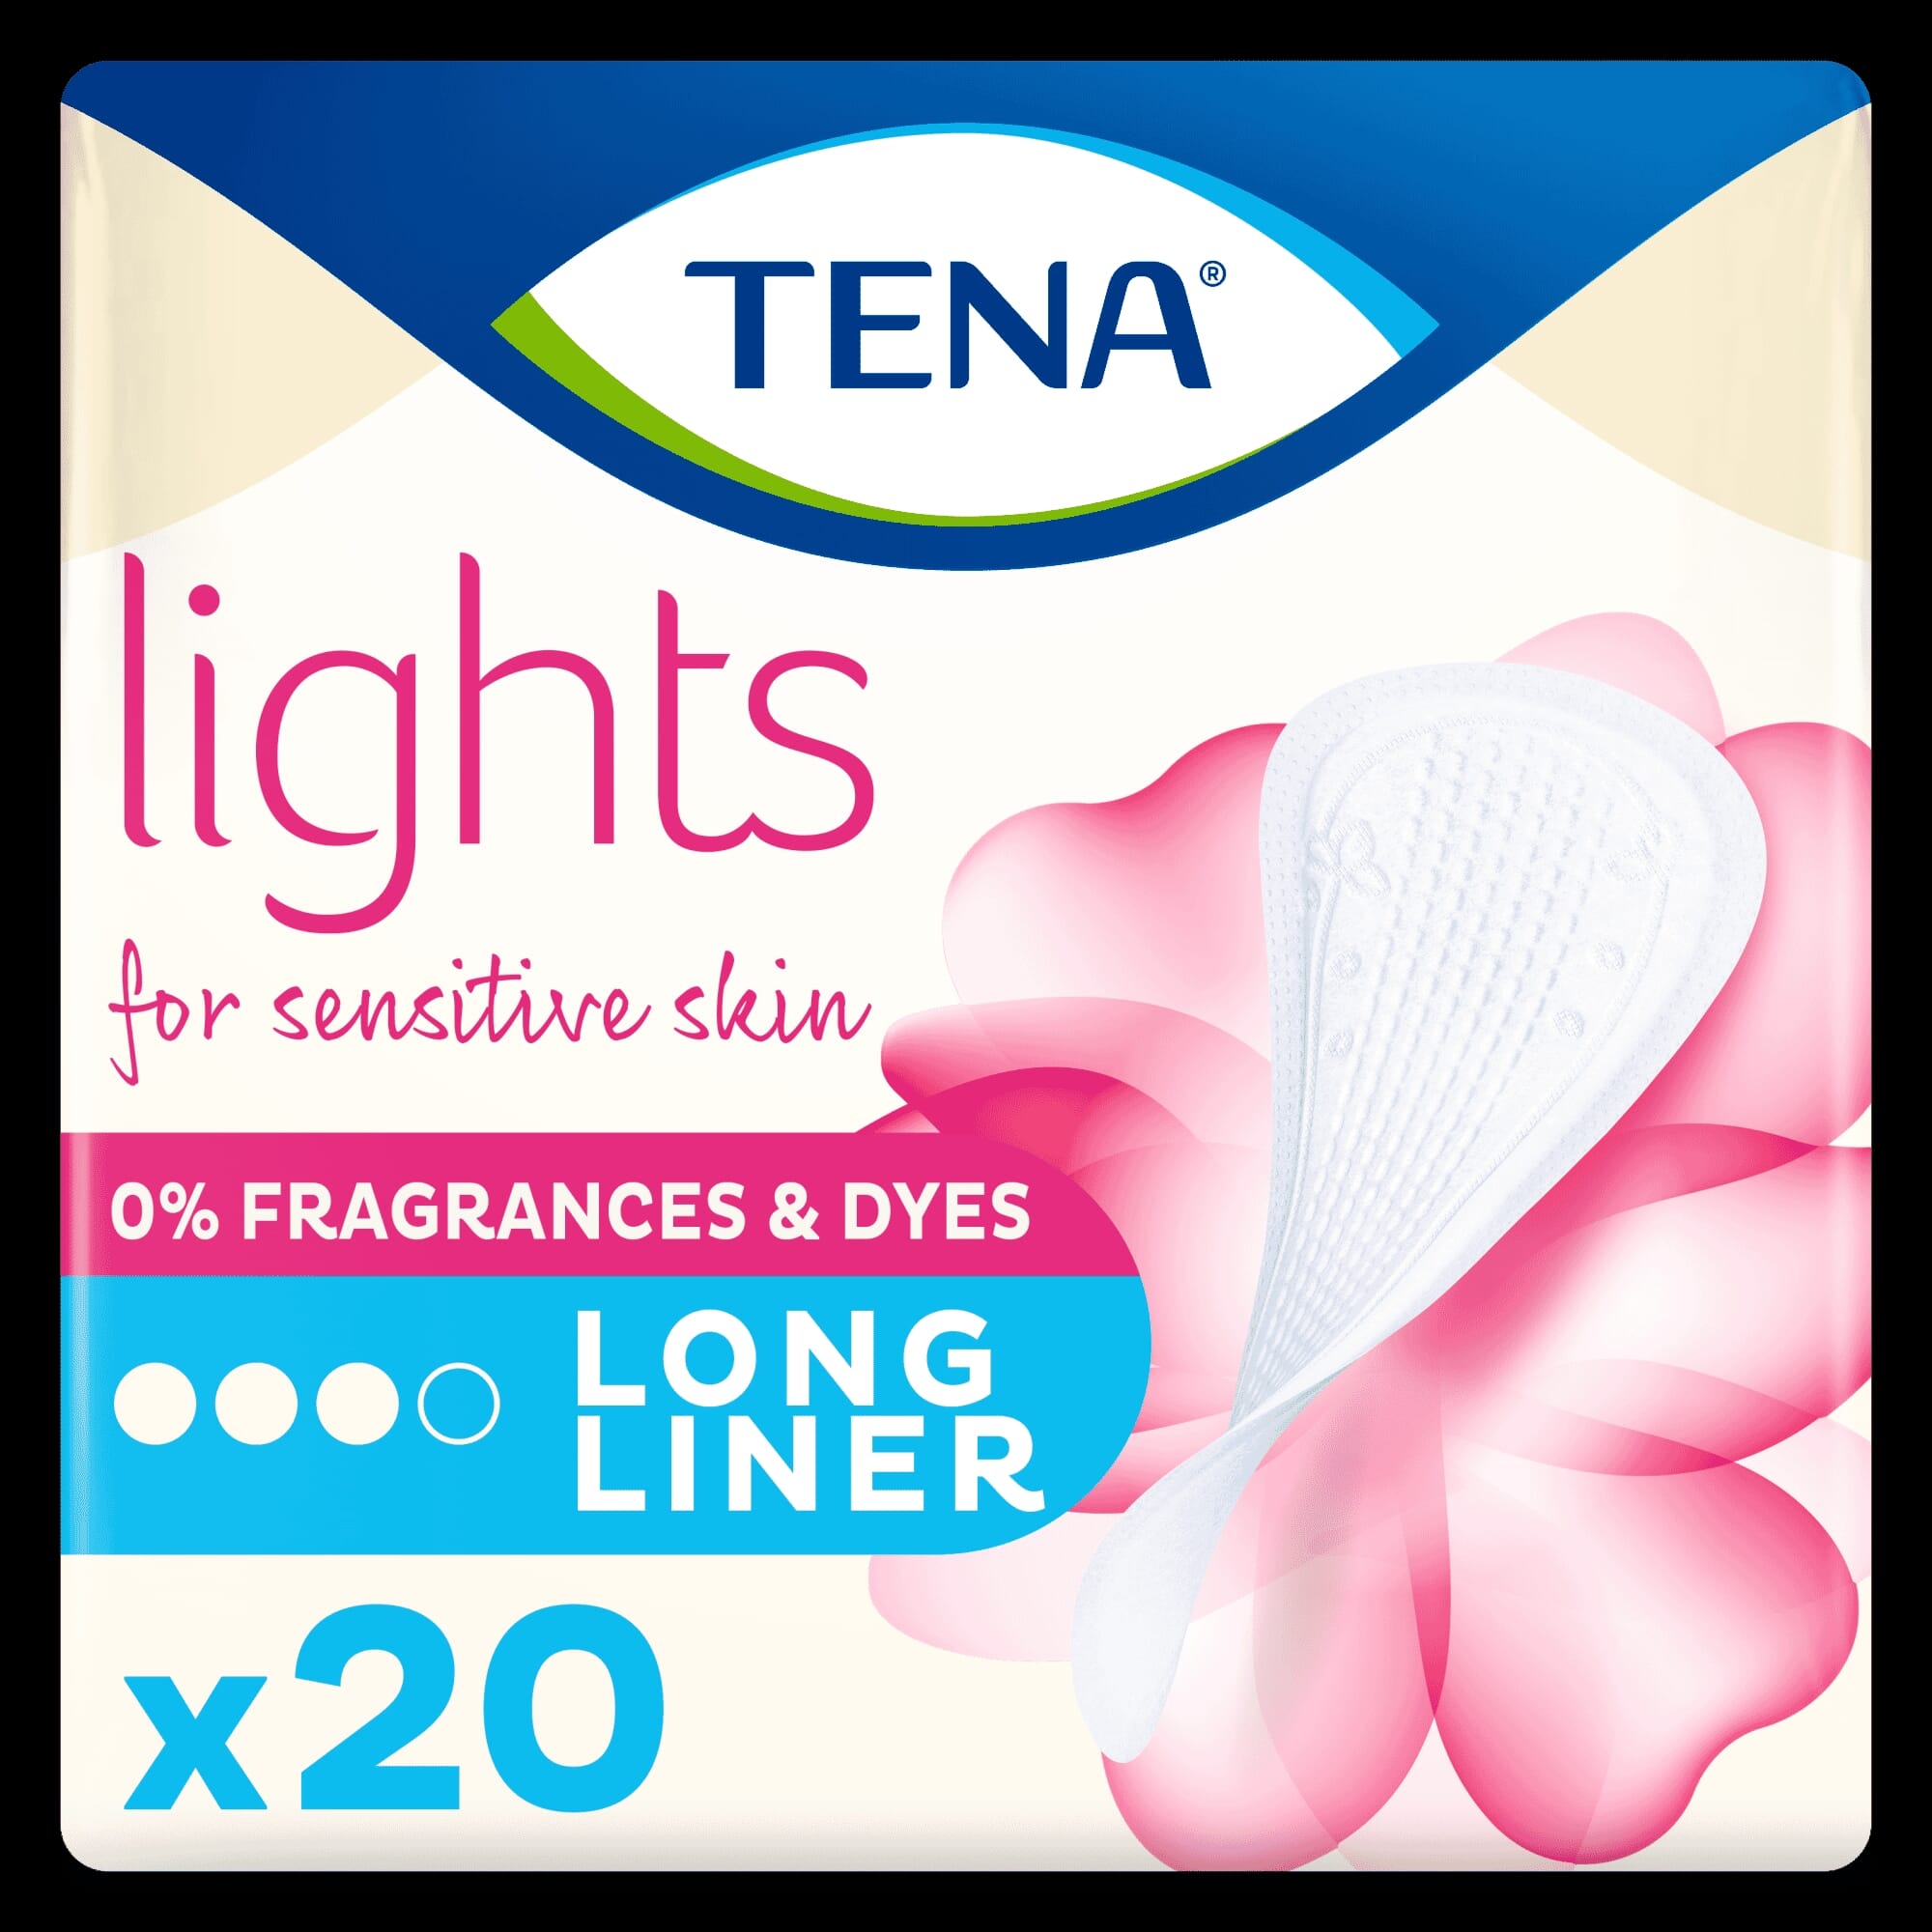 View TENA Long Light Liners information